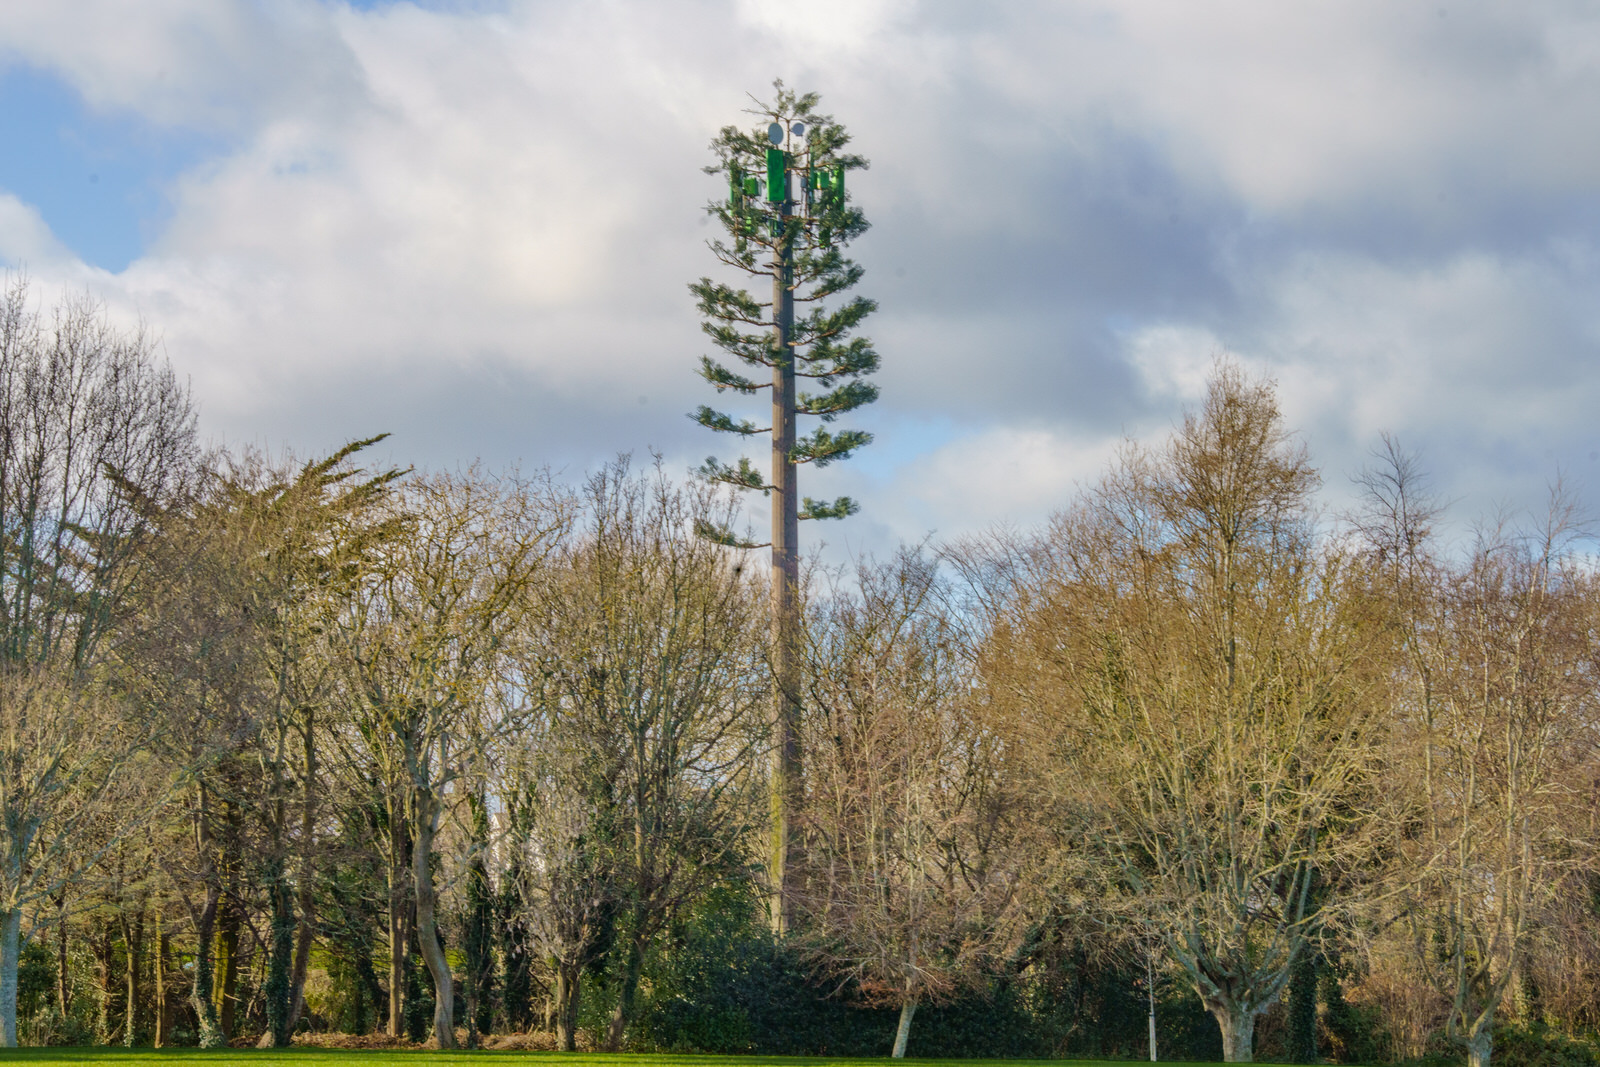 MY FIRST TIME TO SEE A MOBILE TOWER PRETENDING TO BE A FIR TREE MY FIRST TIME TO SEE A MOBILE TOWER PRETENDING TO BE A FIR TREE 